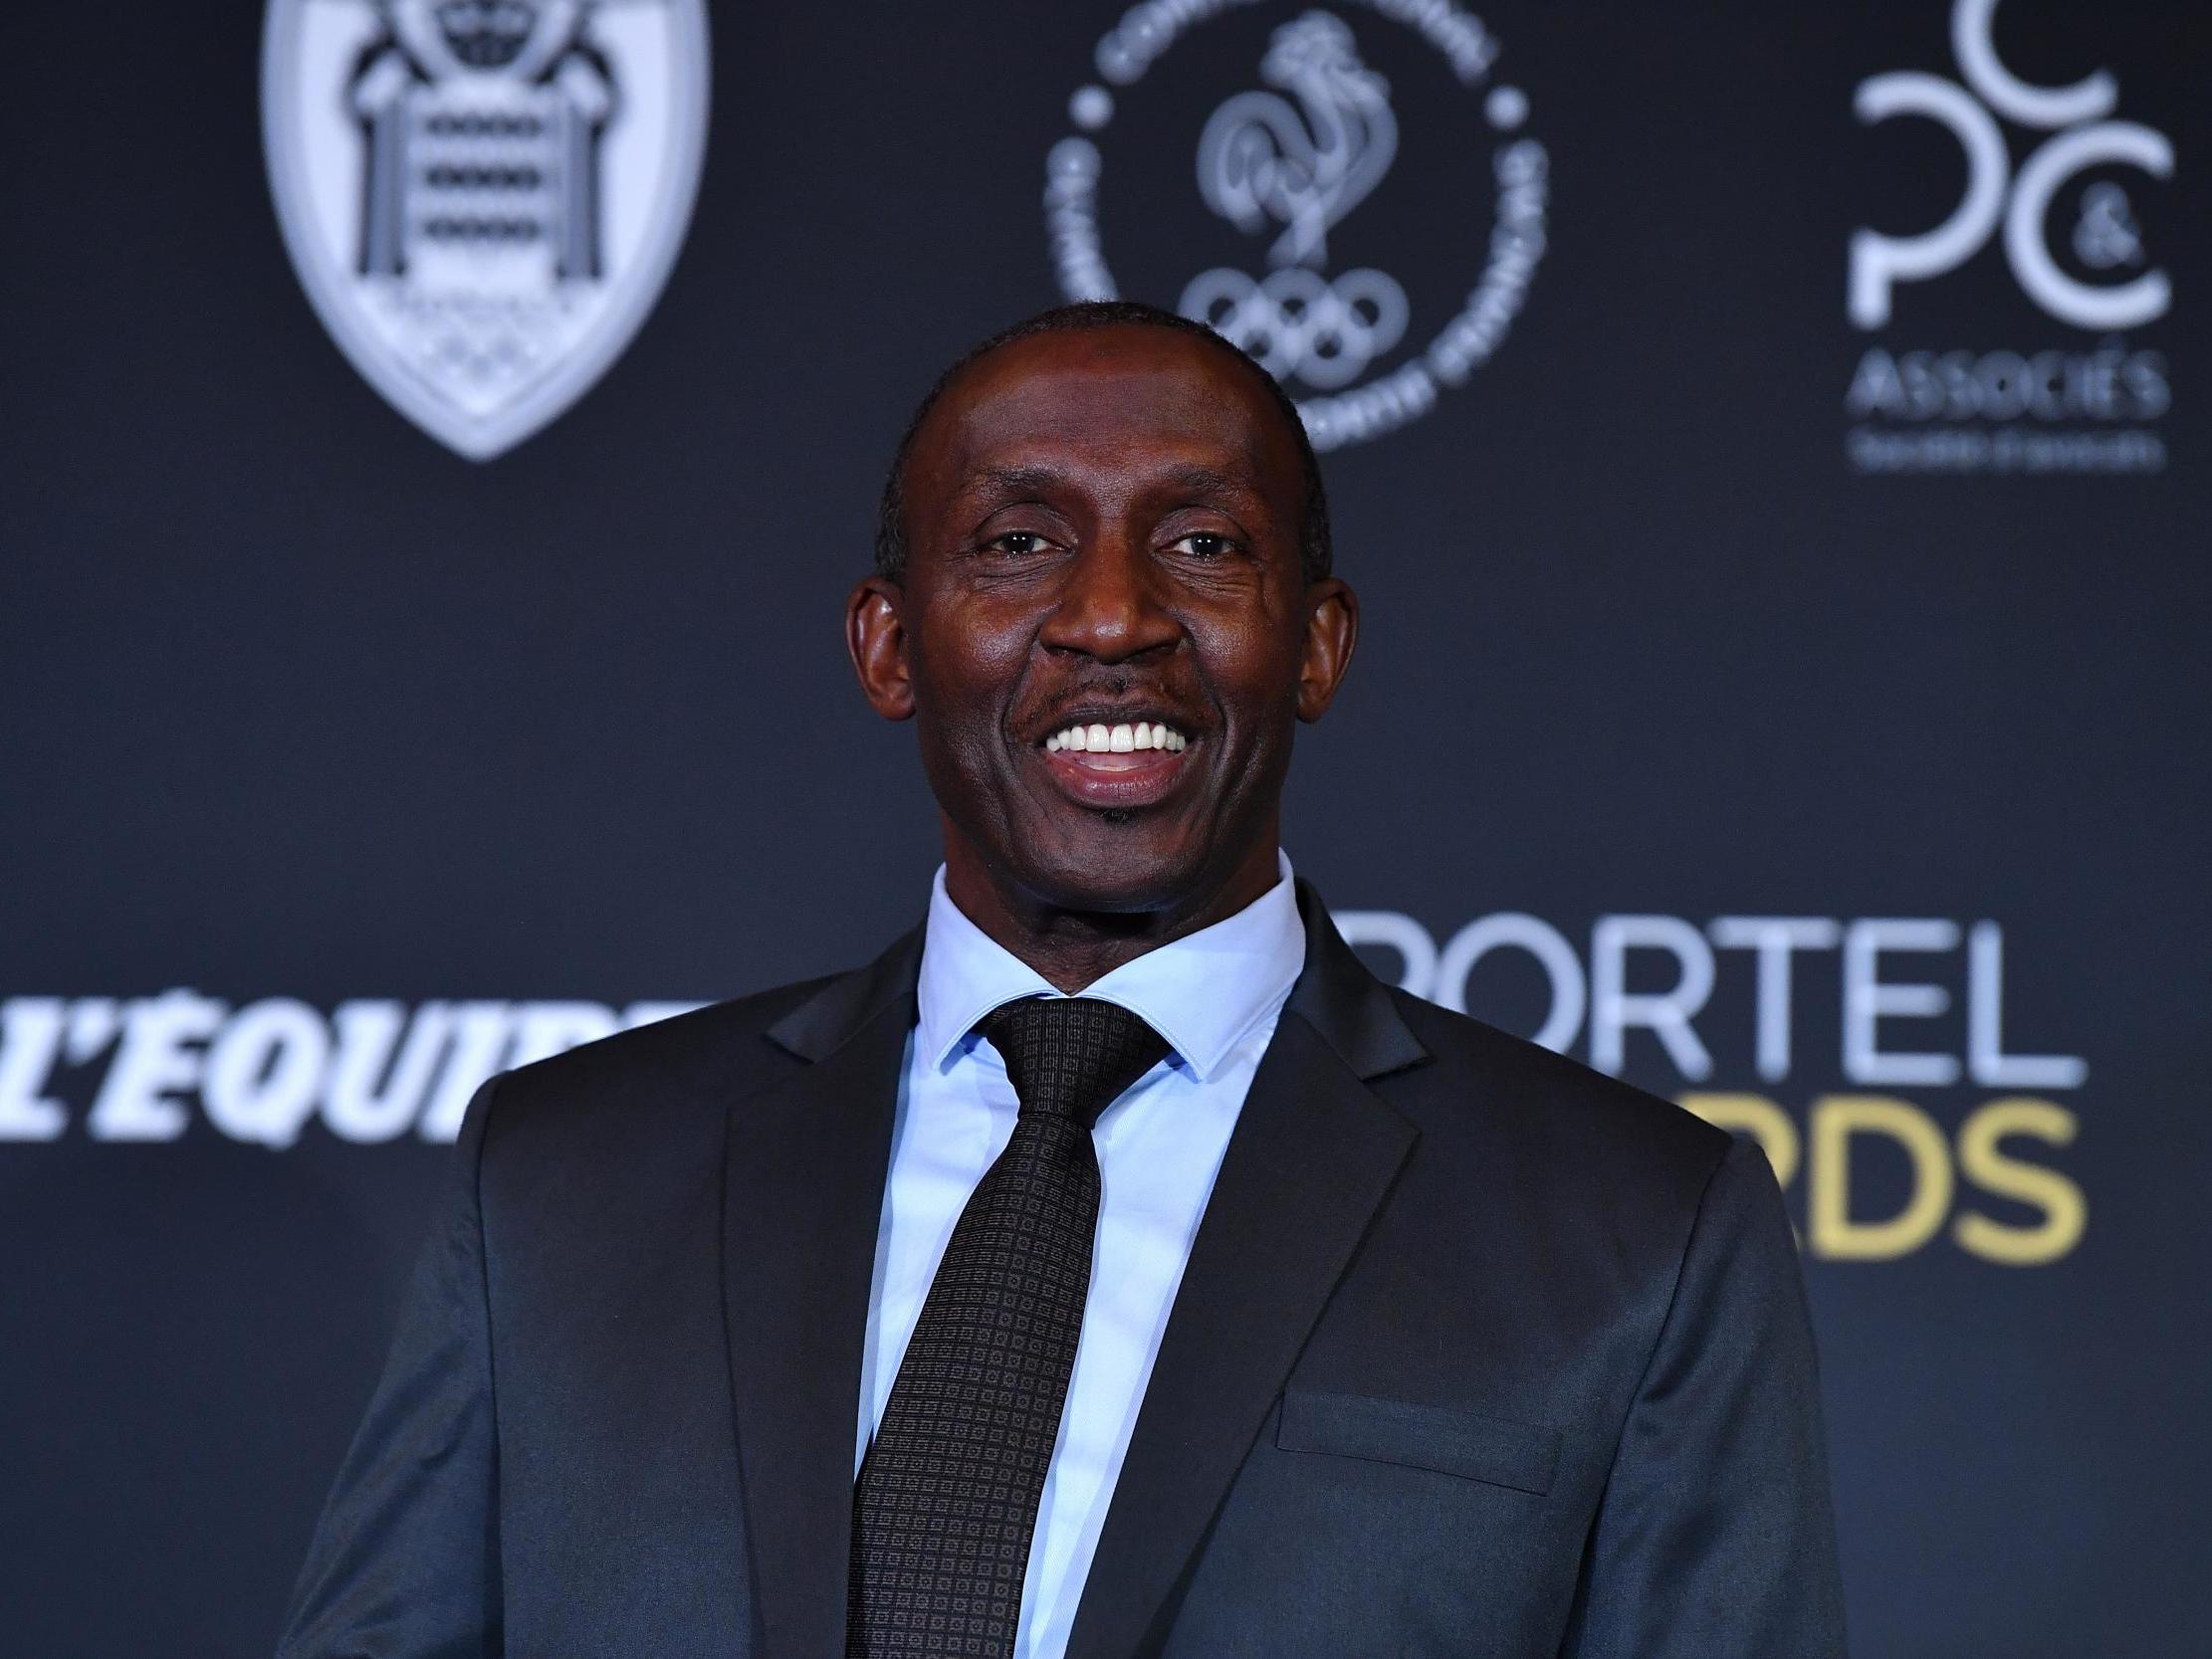 Met police deny &apos;misconduct issues&apos; in stop and search of Linford Christie athletes thumbnail